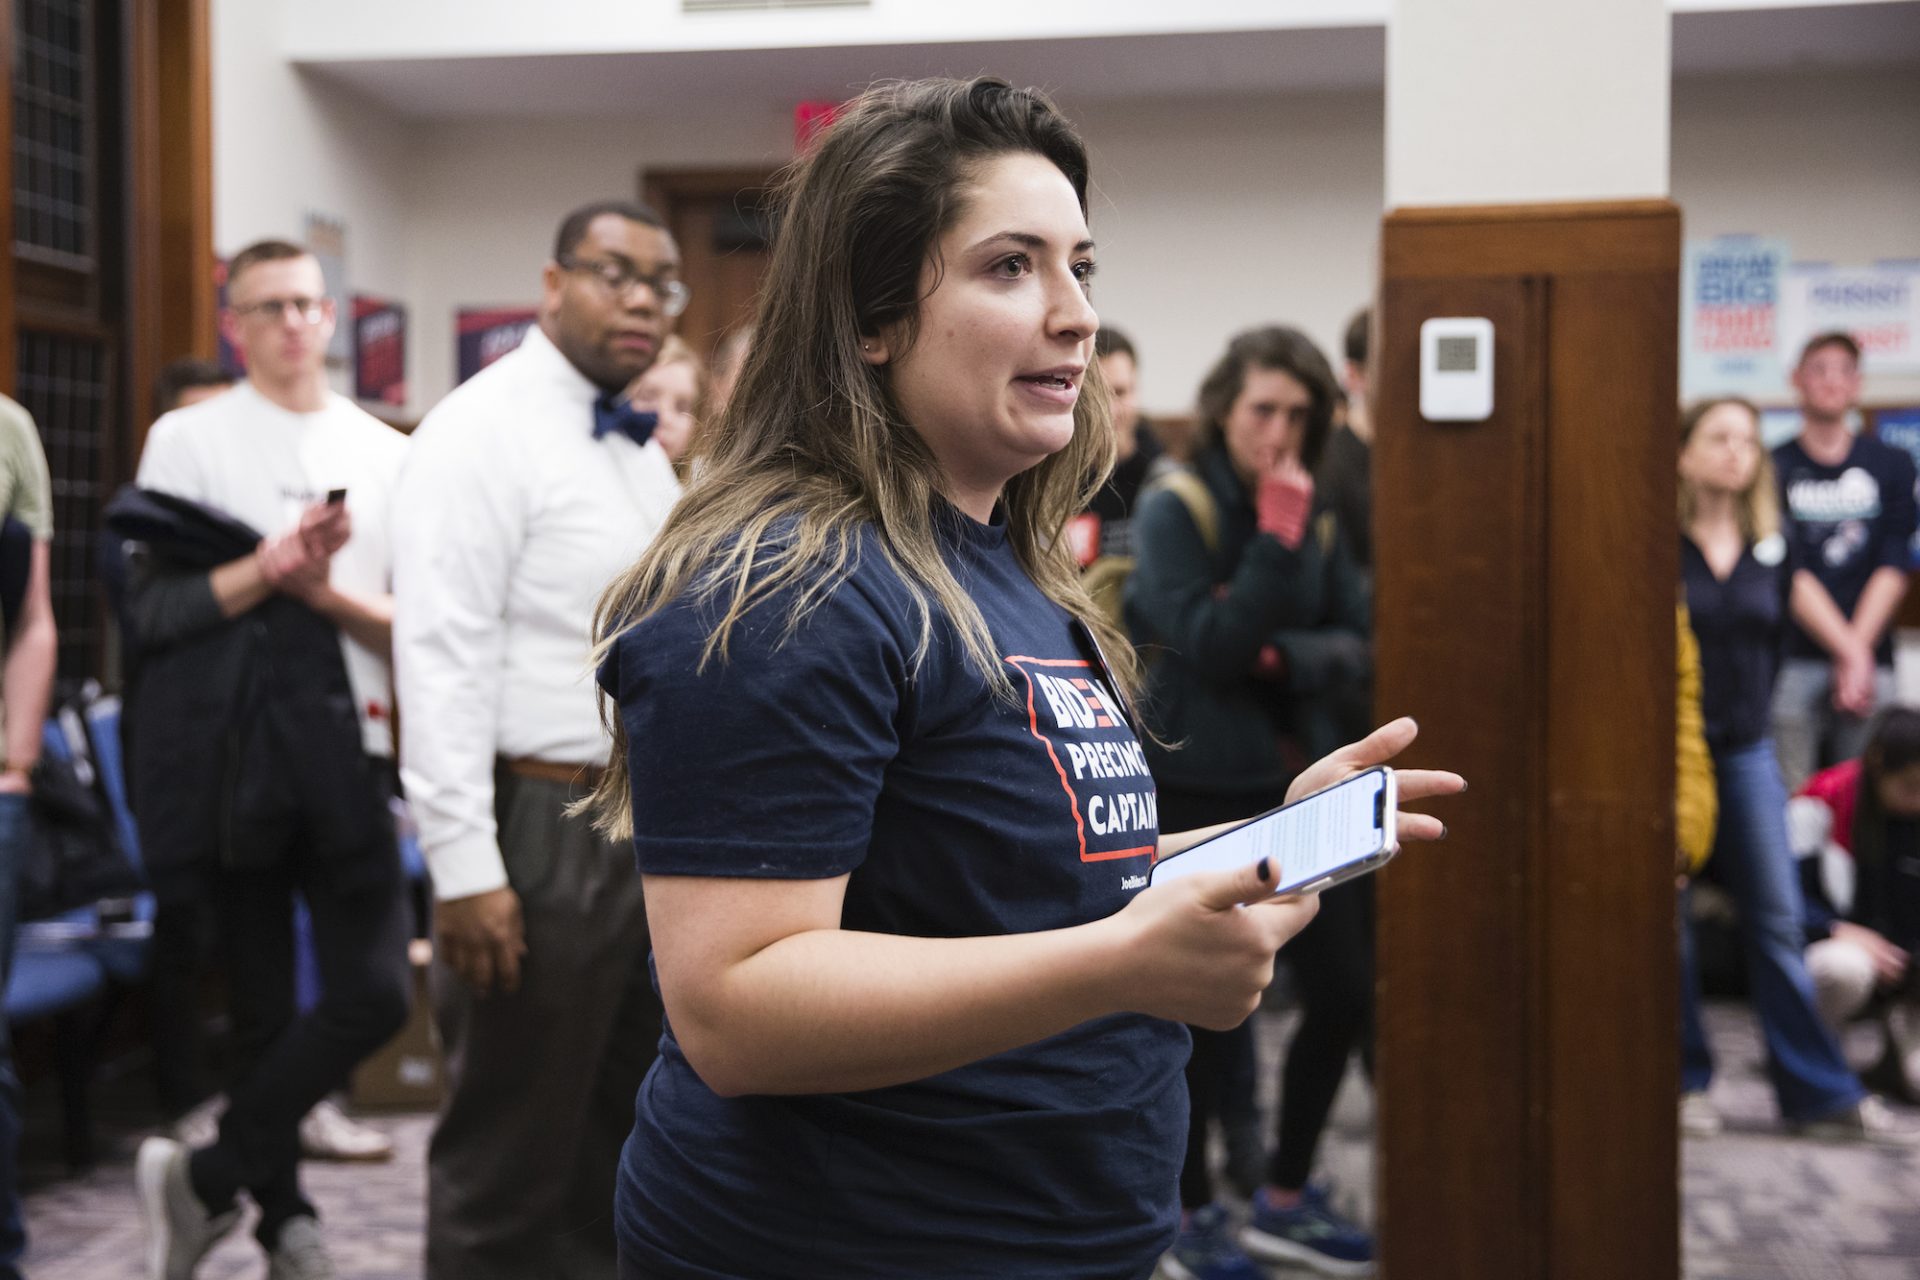 Kelly Langford, an "observer" at the University of Pennsylvania's satellite Iowa caucus, petitions for candidate Joe Biden on February 3, 2020.